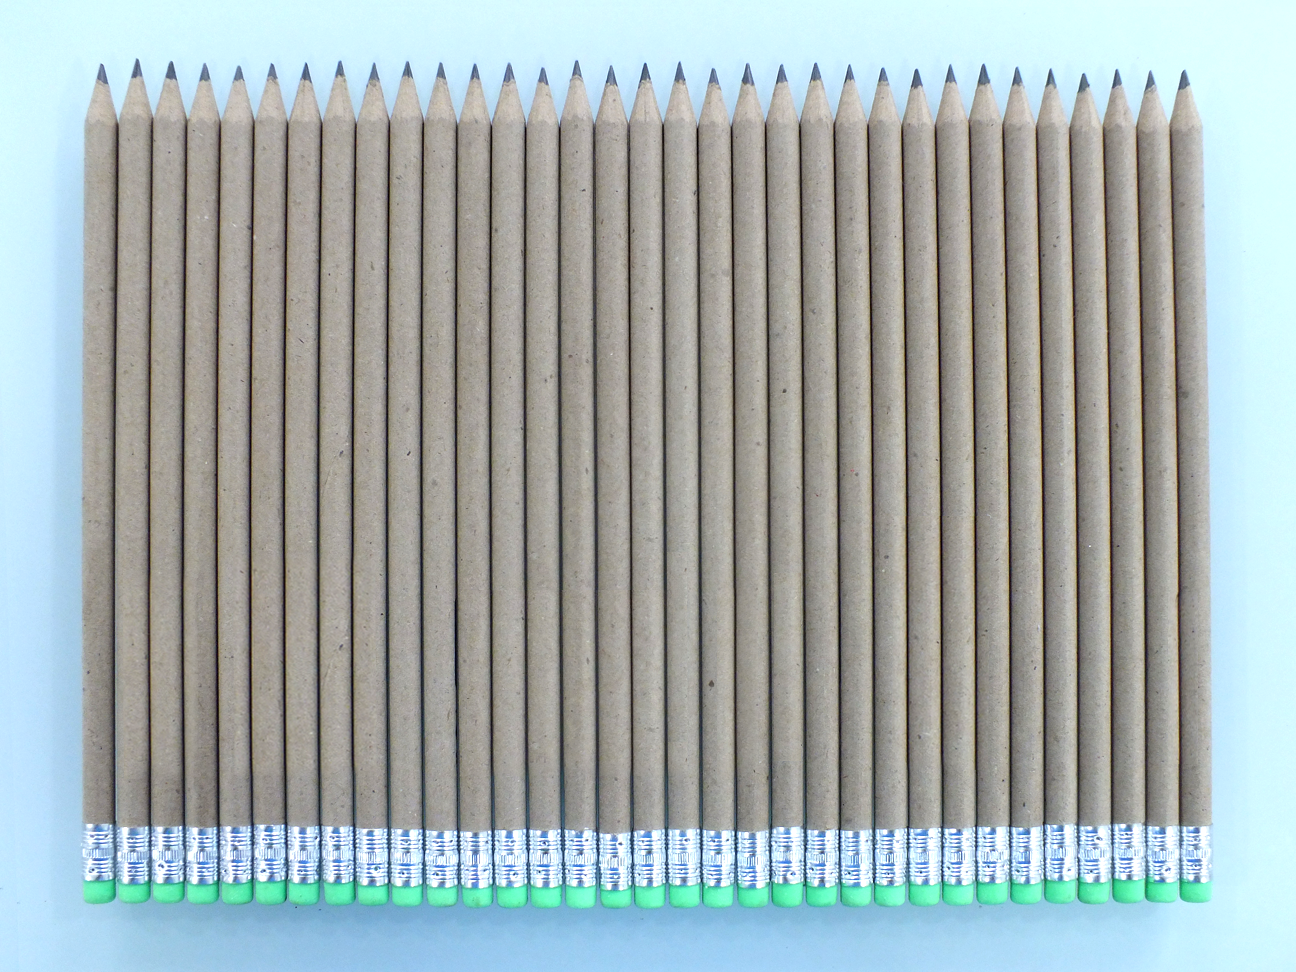 Brown Craft paper 144 ct, #2 Recycled paper Pencils with eraser